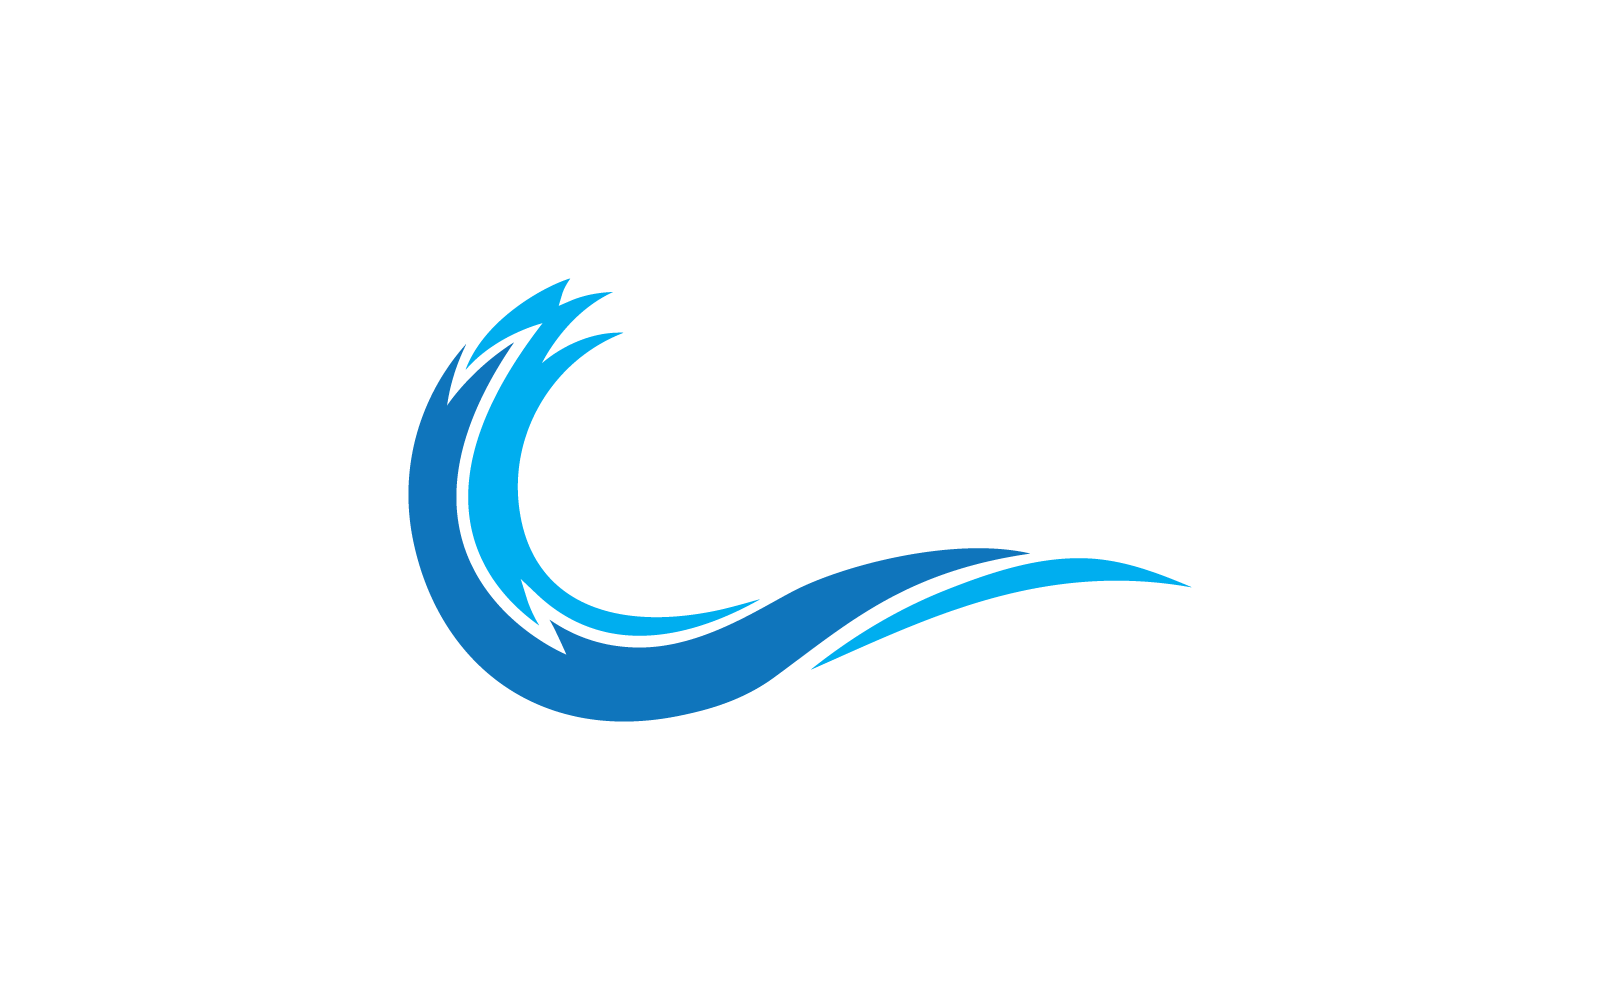 Water Wave logo icon vector flat design template